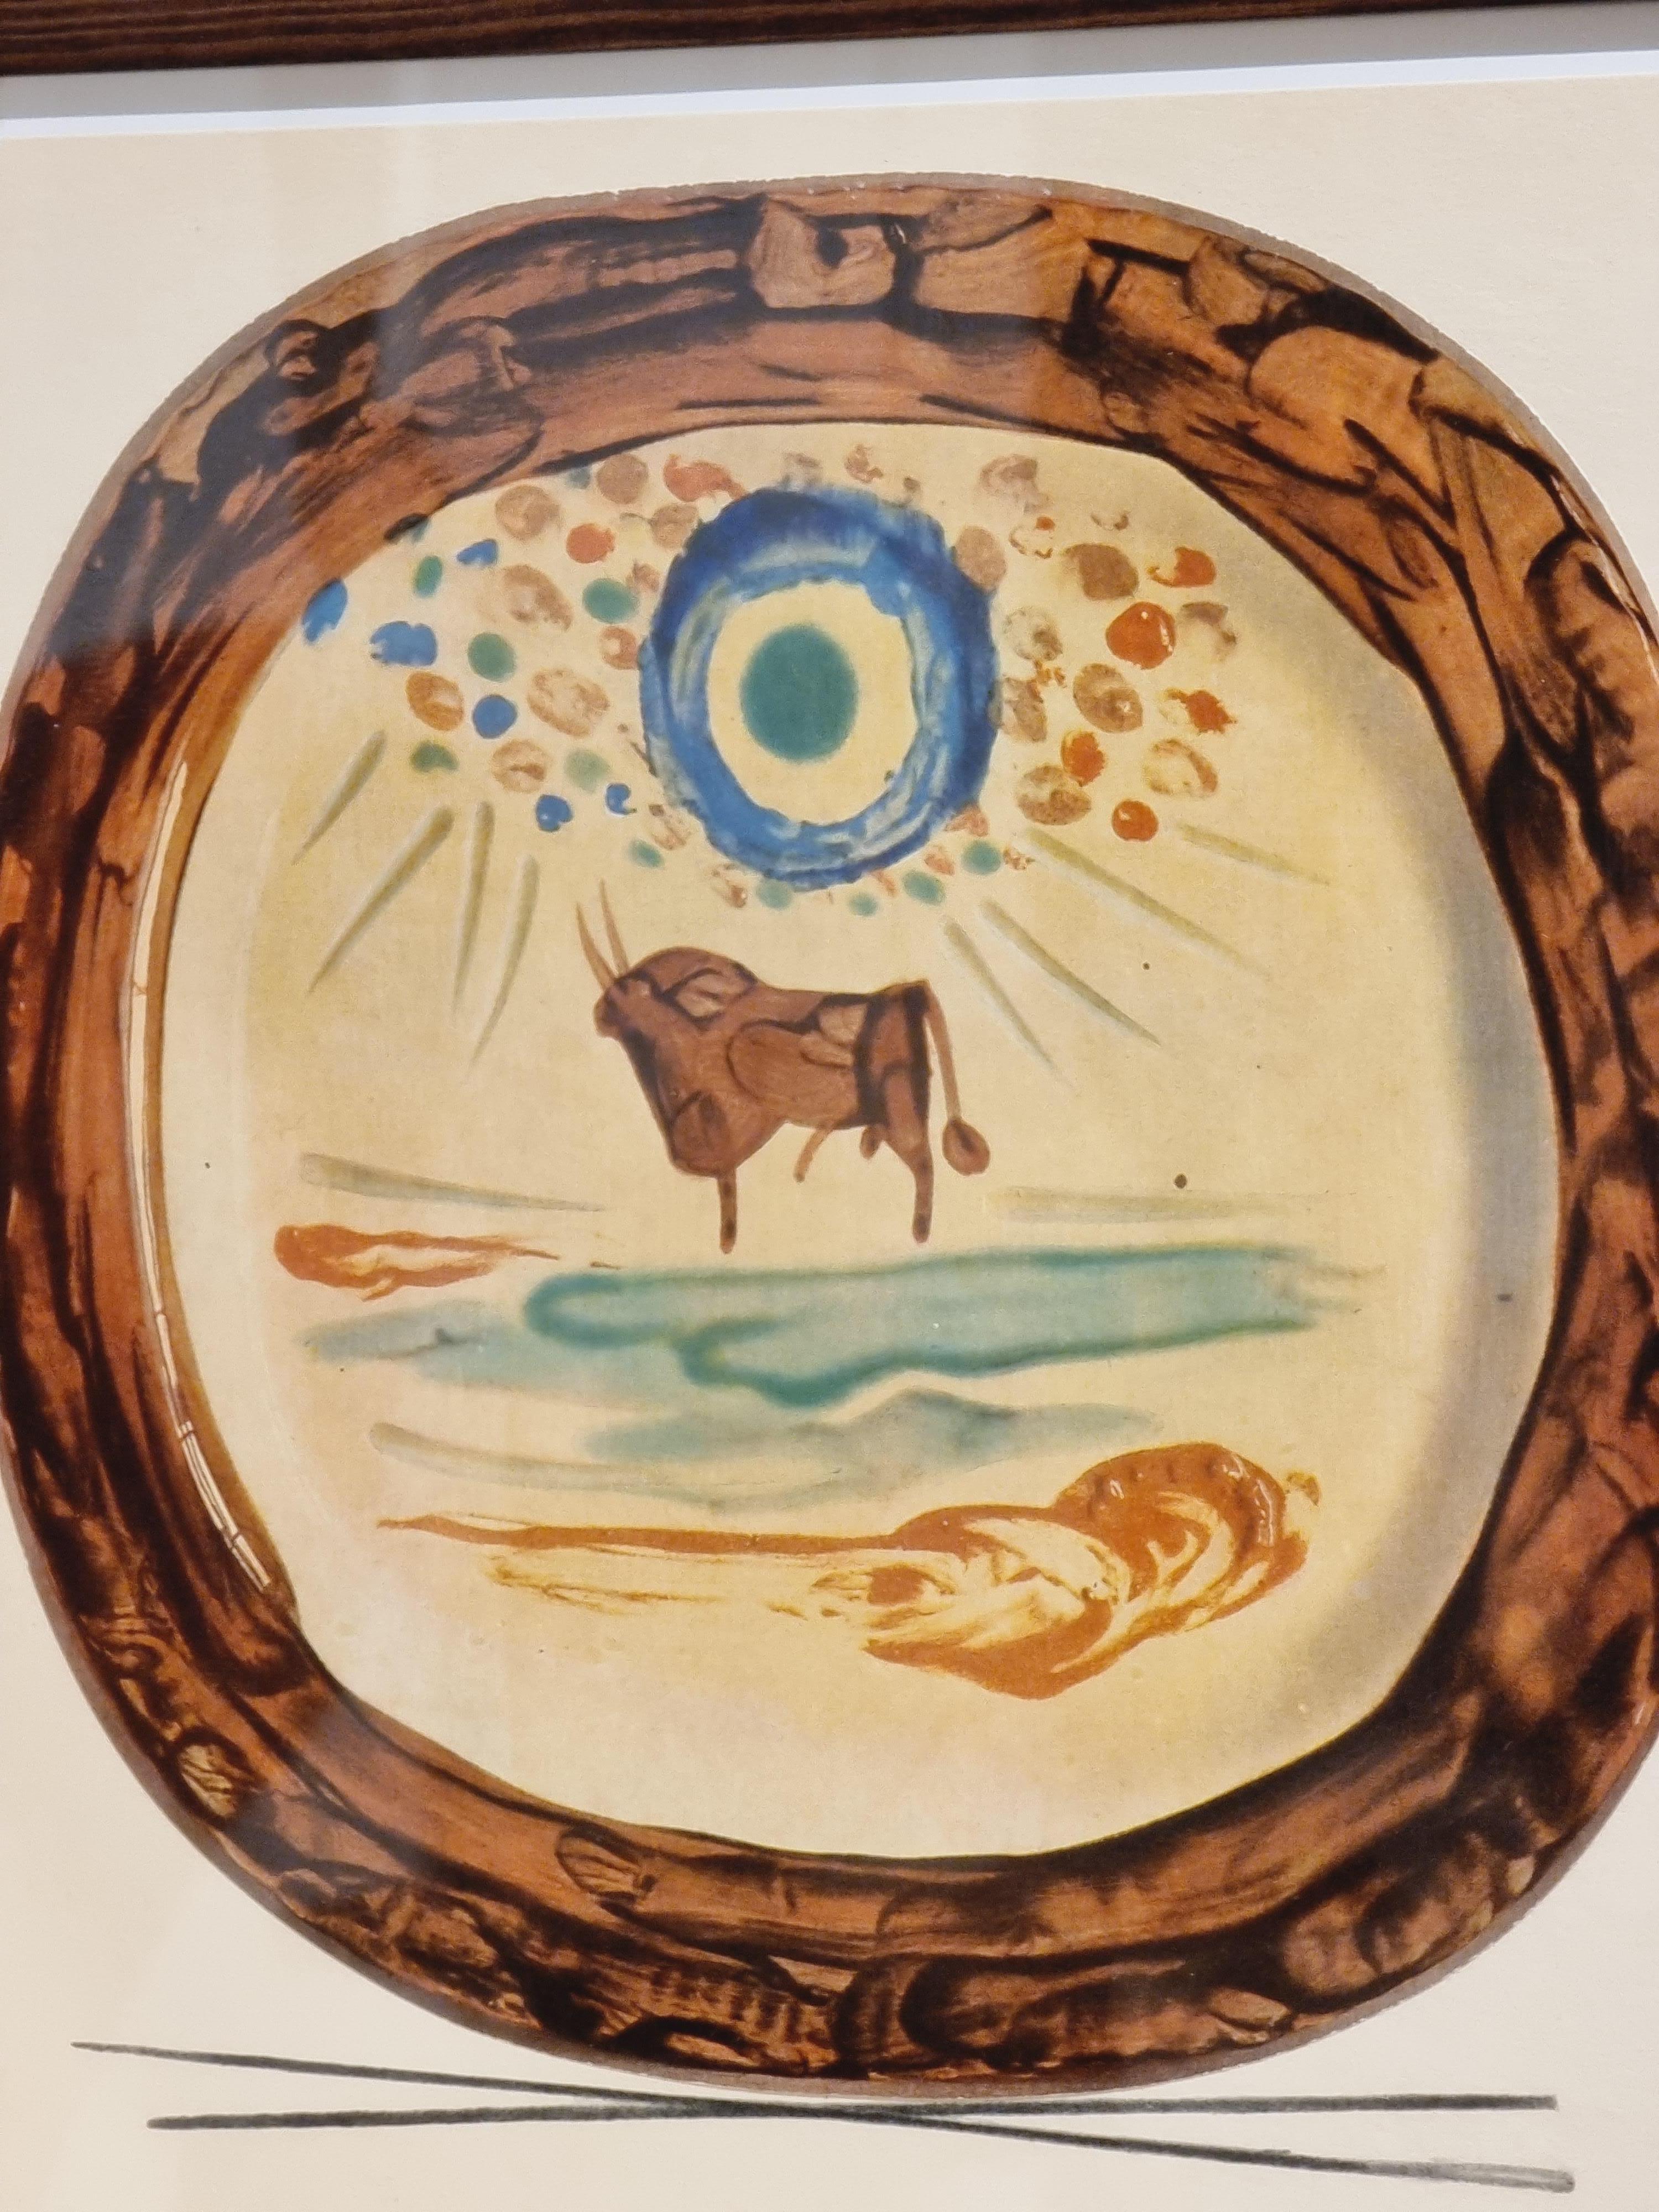 An exquisite shiny polychrome 12 prints of Picasso Vallauris ceramic plates depicting various motifs such as bull fighting, faces, food etc. The color print is attached to a thick, high quality paper with decorative lines. 

The prints are